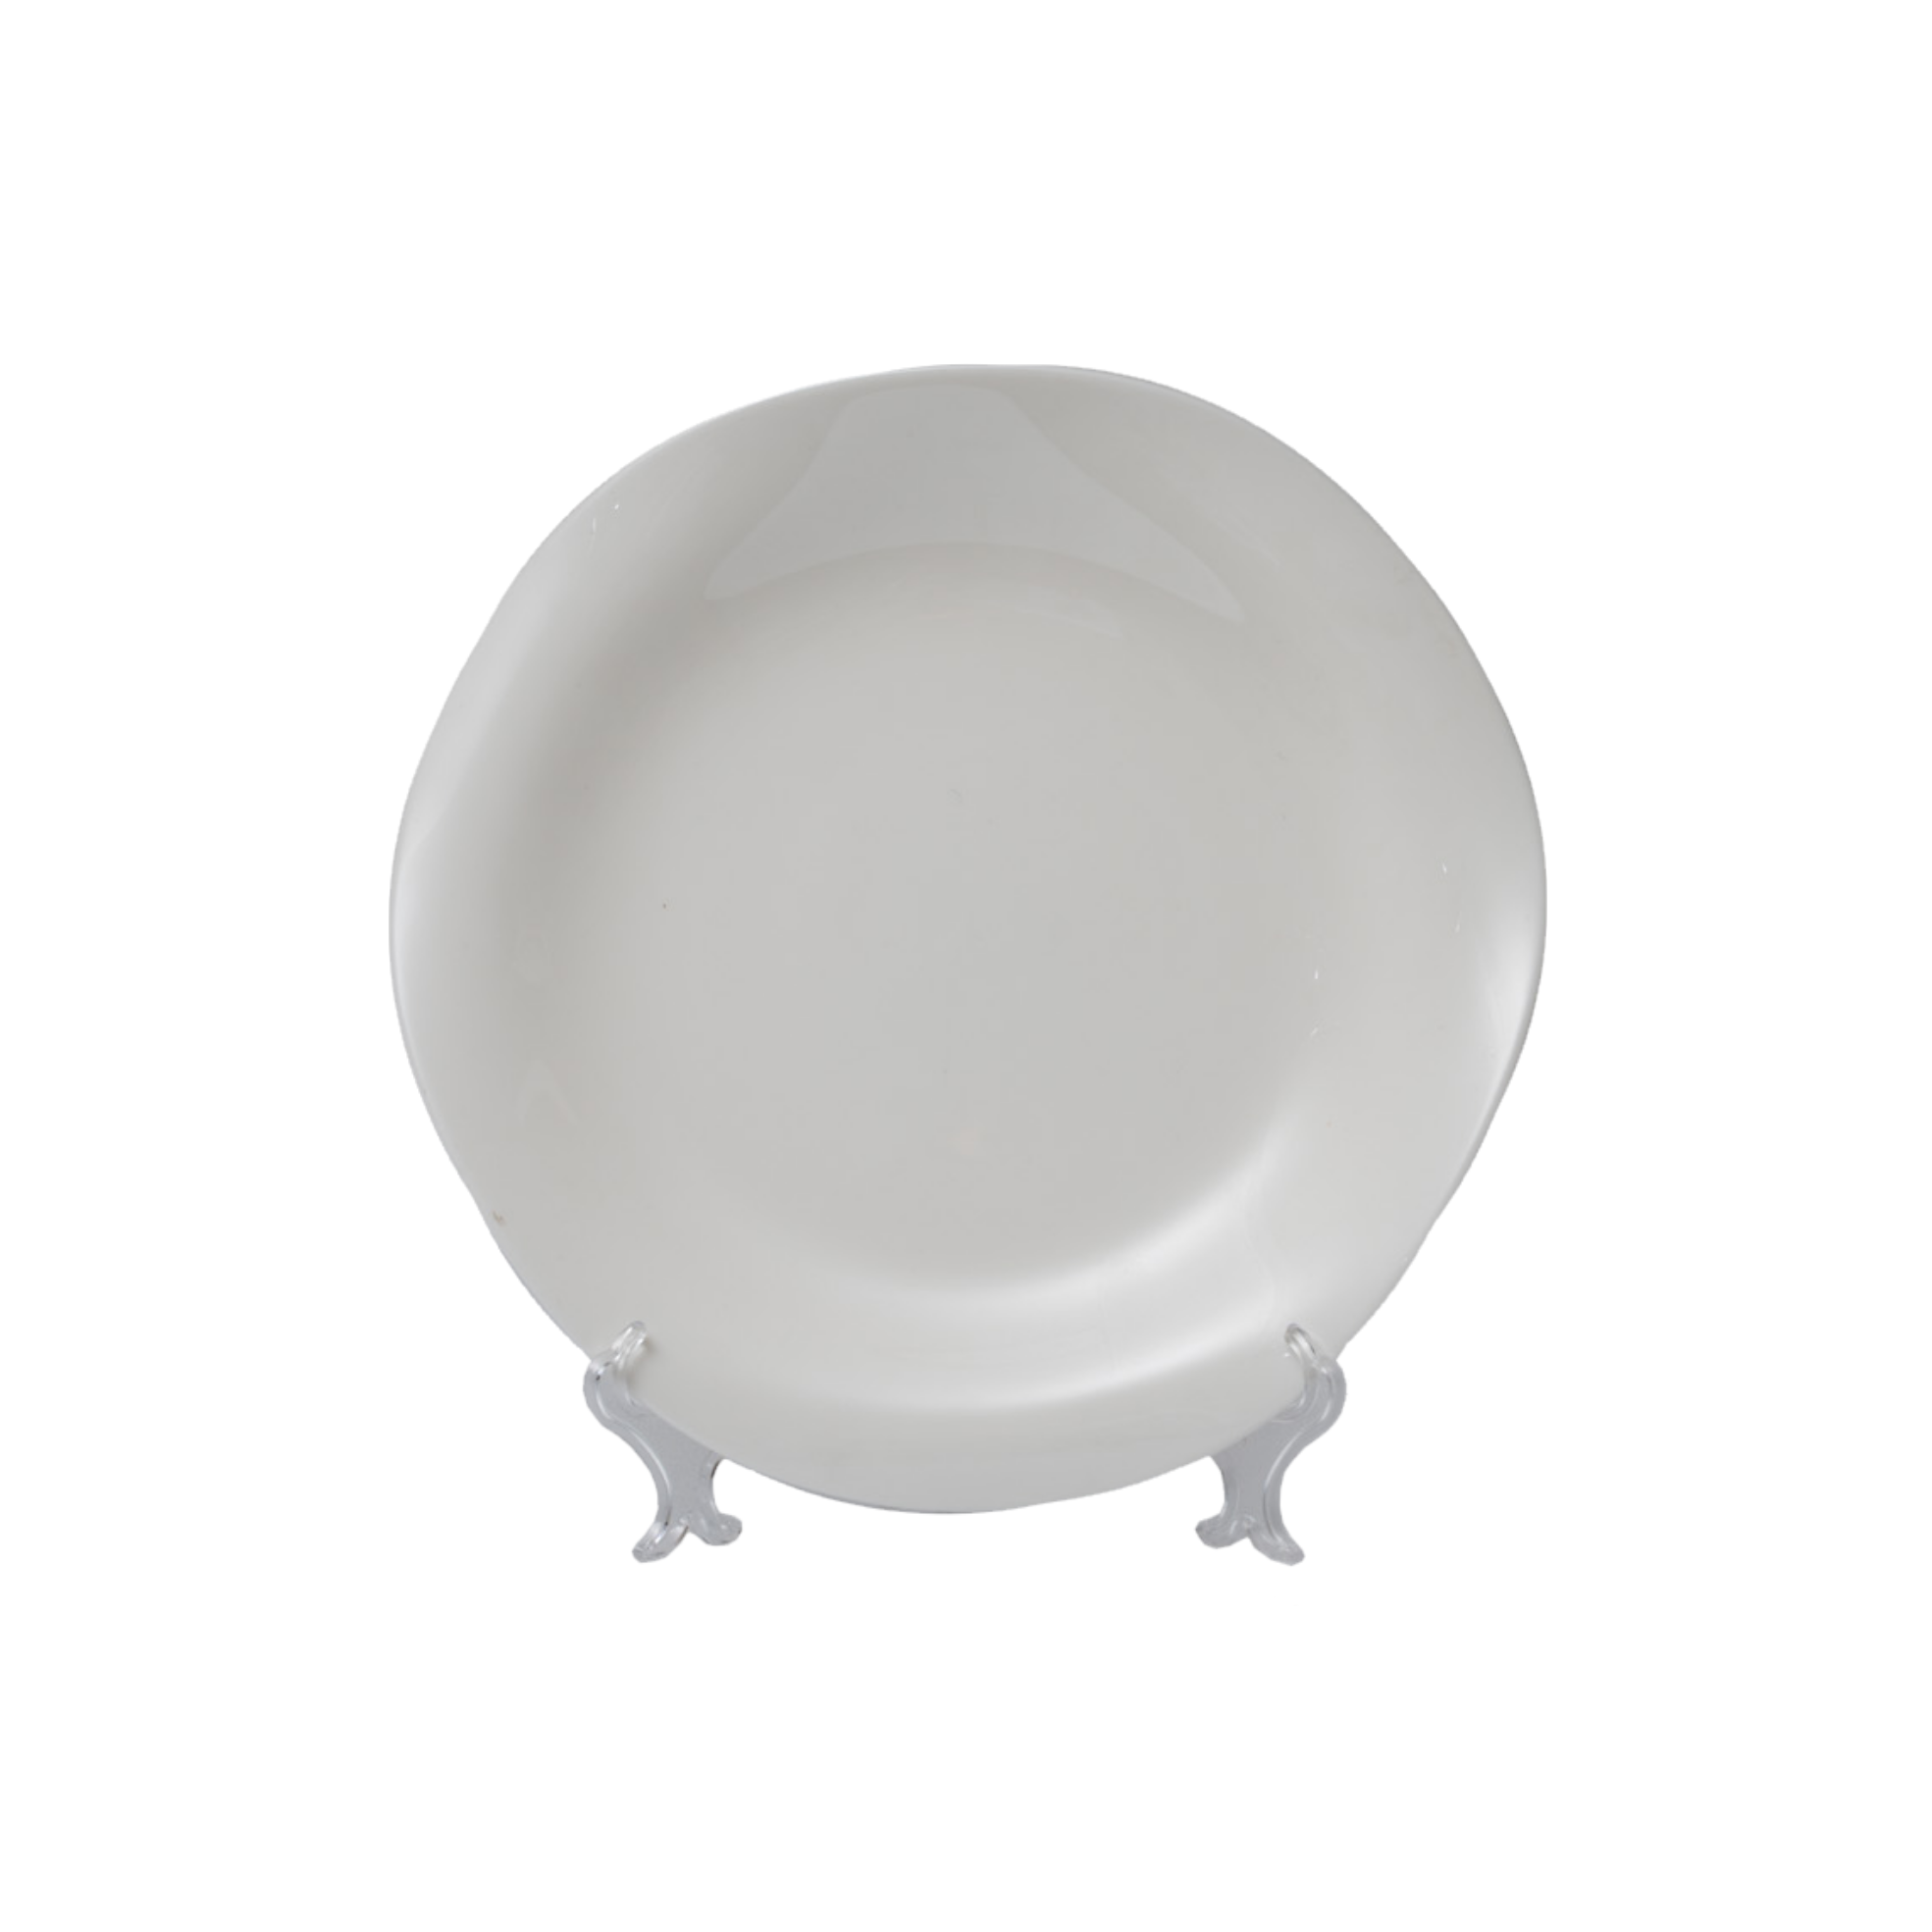 DINNER Plate Tendency cm 27  (30 each container)